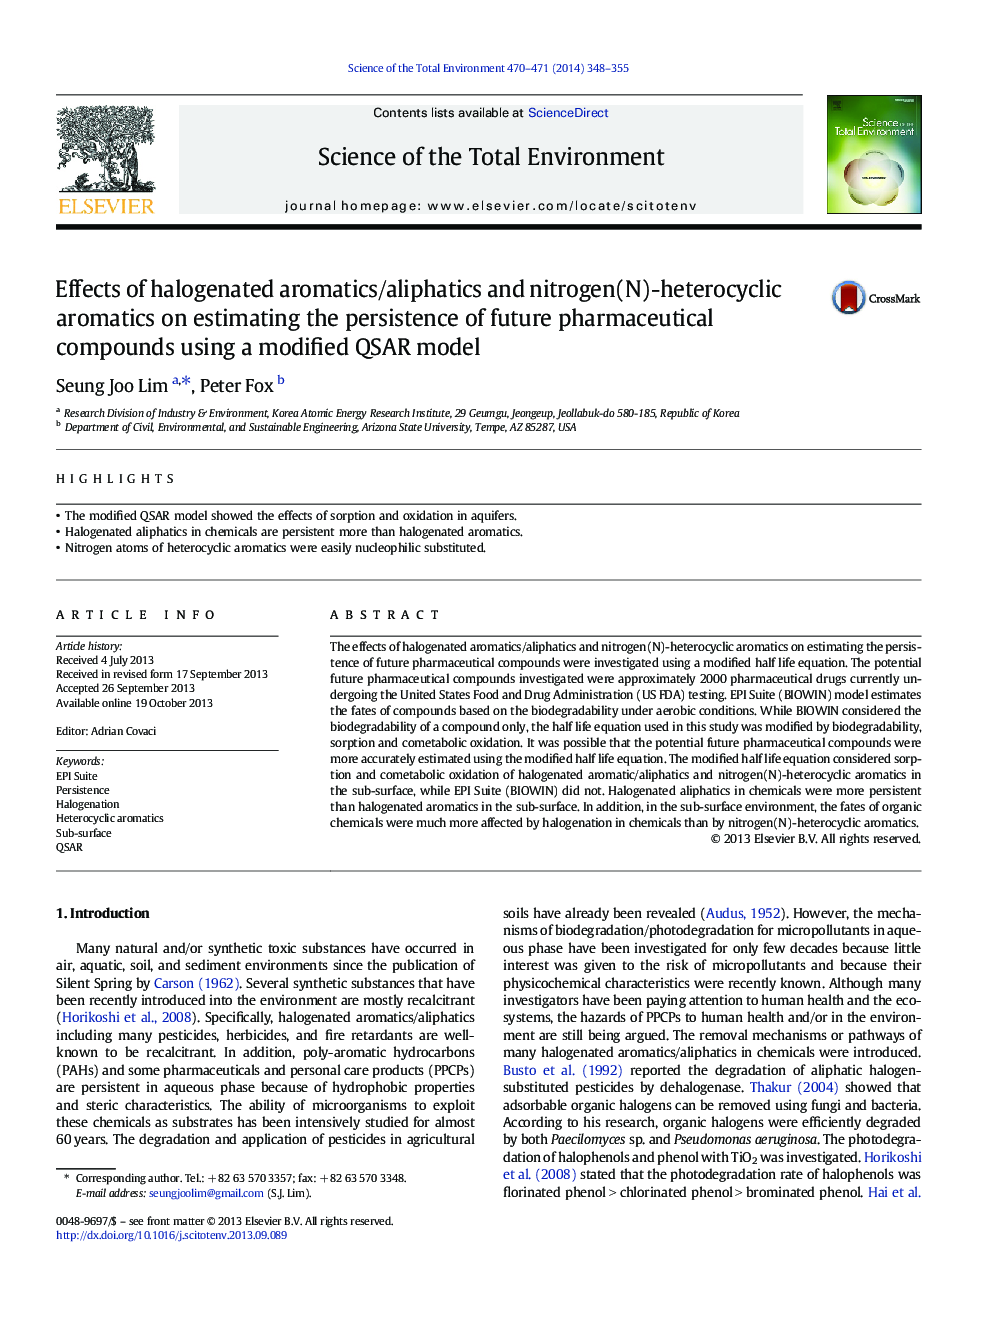 Effects of halogenated aromatics/aliphatics and nitrogen(N)-heterocyclic aromatics on estimating the persistence of future pharmaceutical compounds using a modified QSAR model